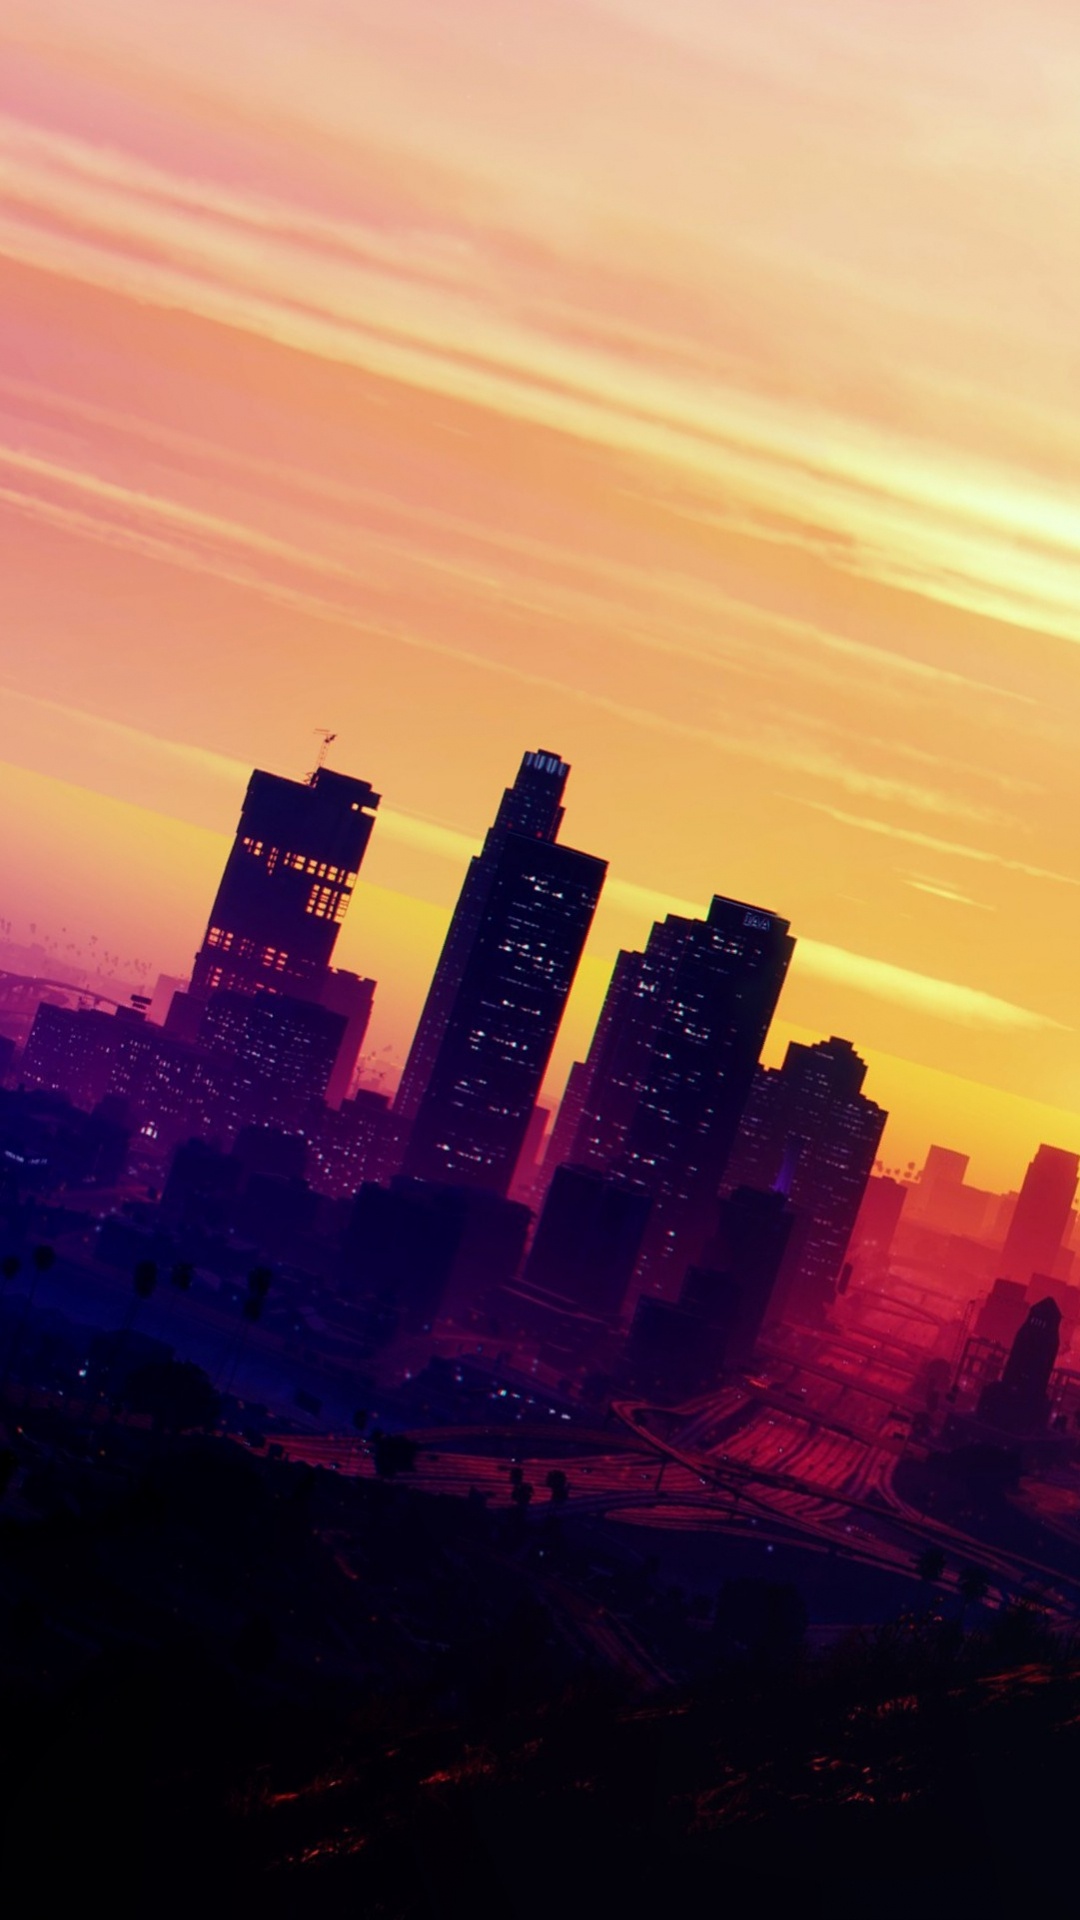 Grand Theft Auto v, Grand Theft Auto San Andreas, Horizont, Afterglow, Sonnenuntergang. Wallpaper in 1080x1920 Resolution